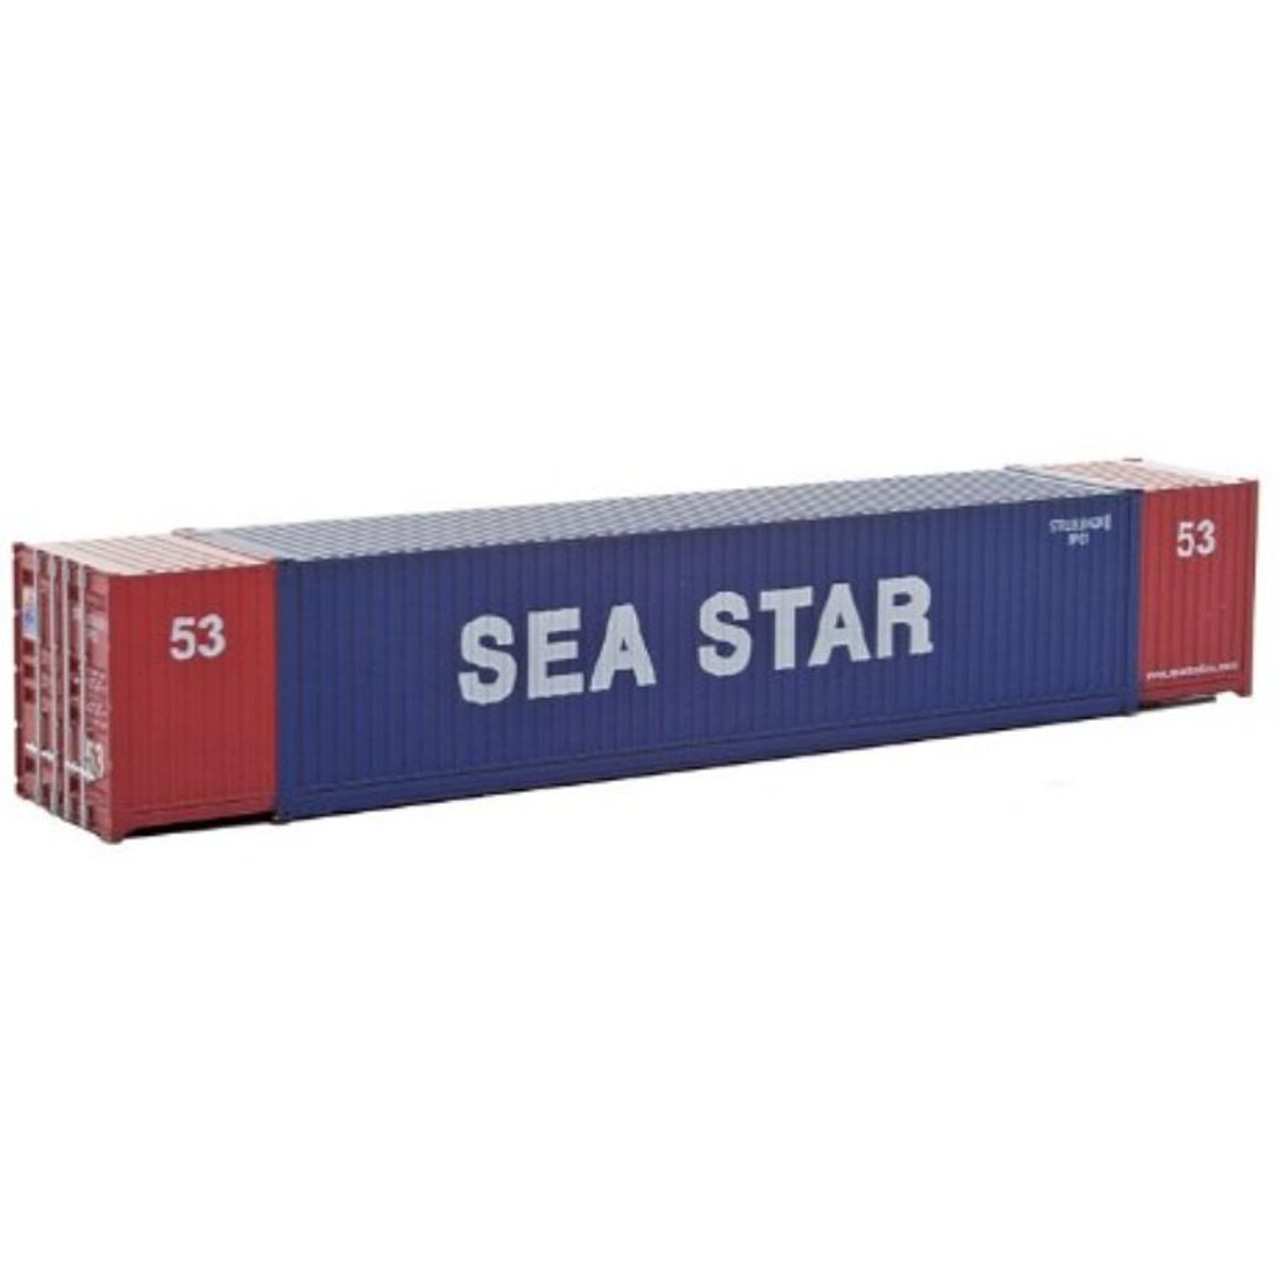 WALTHERS SCENEMASTER HO SCALE 53' CONTAINER SEA STAR 949-8517 